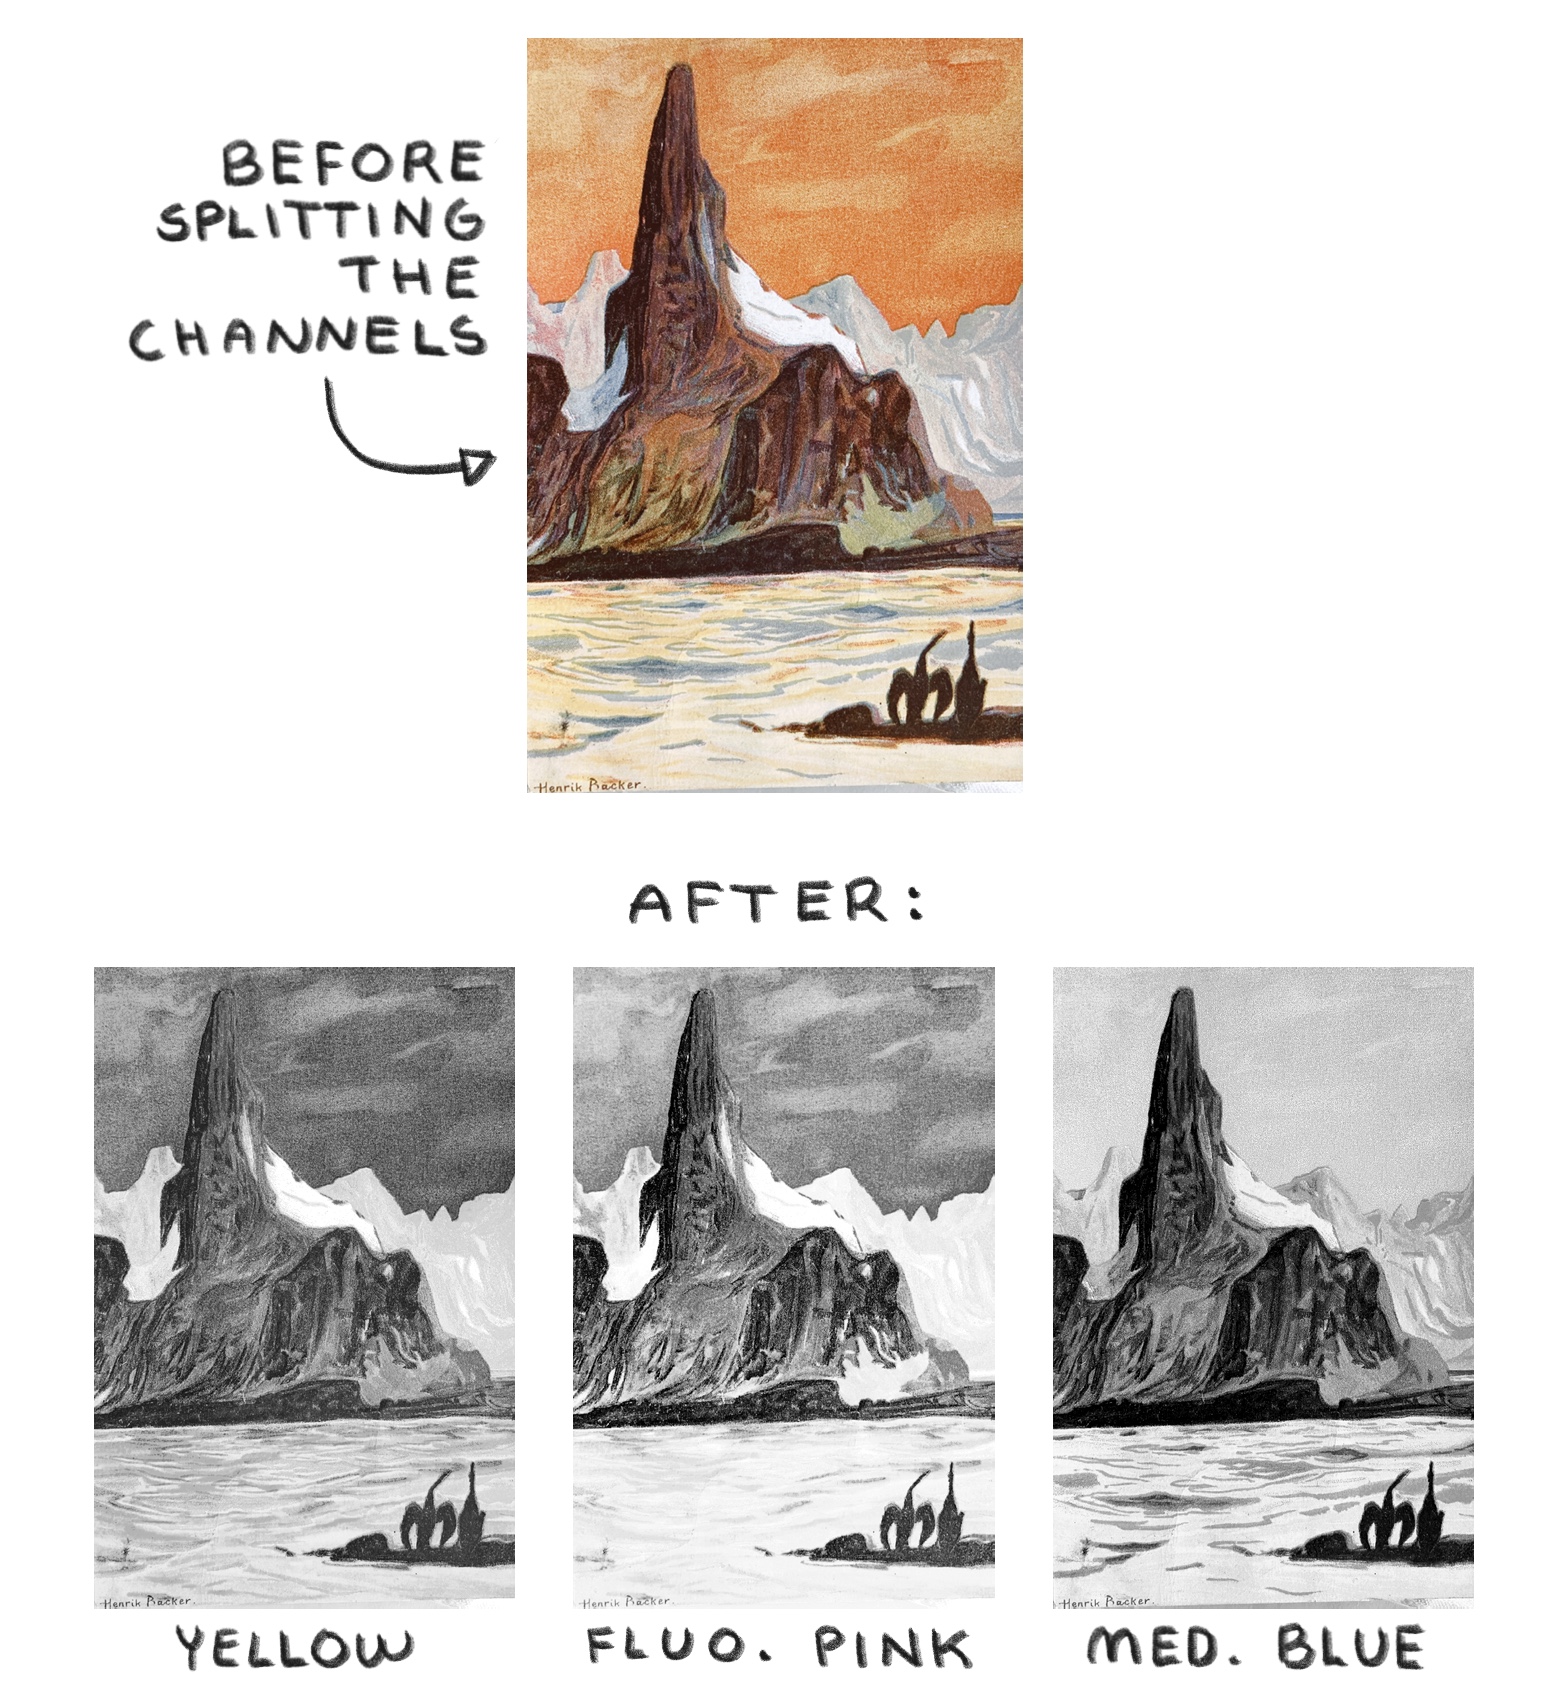 At the top a photo of a painting in color is shown, of a mountain and some birds in front in the water. At the bottom, three black and white photos depict the same painting, but after splitting the original into 3 channels in Photoshop, which gives you 3 grayscale photos, one for each color layer you will print to achieve the colored version.